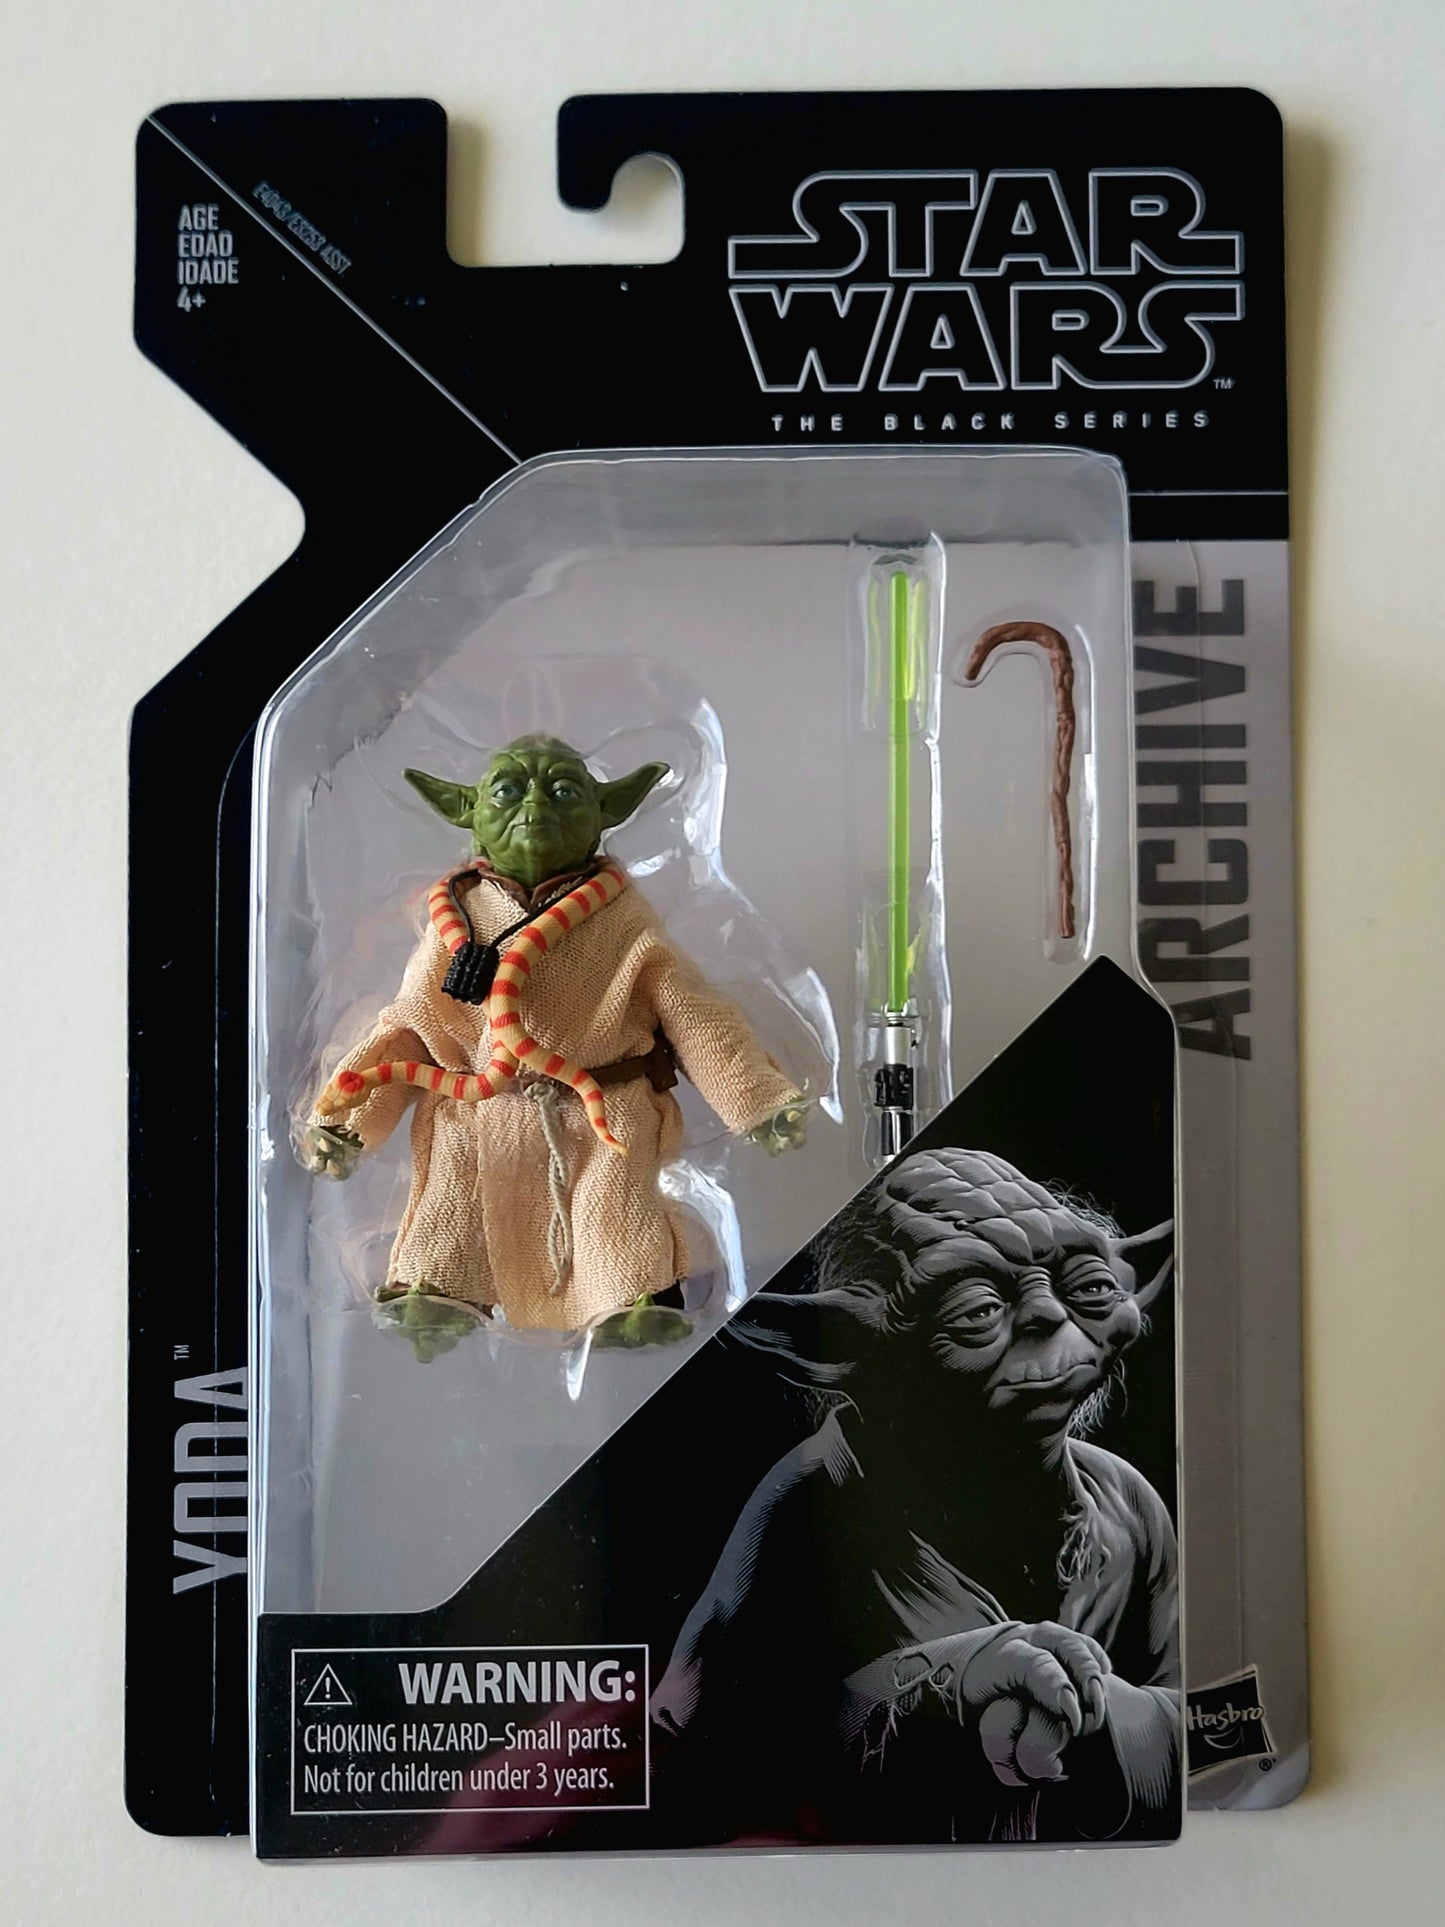 Star Wars: The Black Series Archive Yoda 6-Inch Scale Action Figure